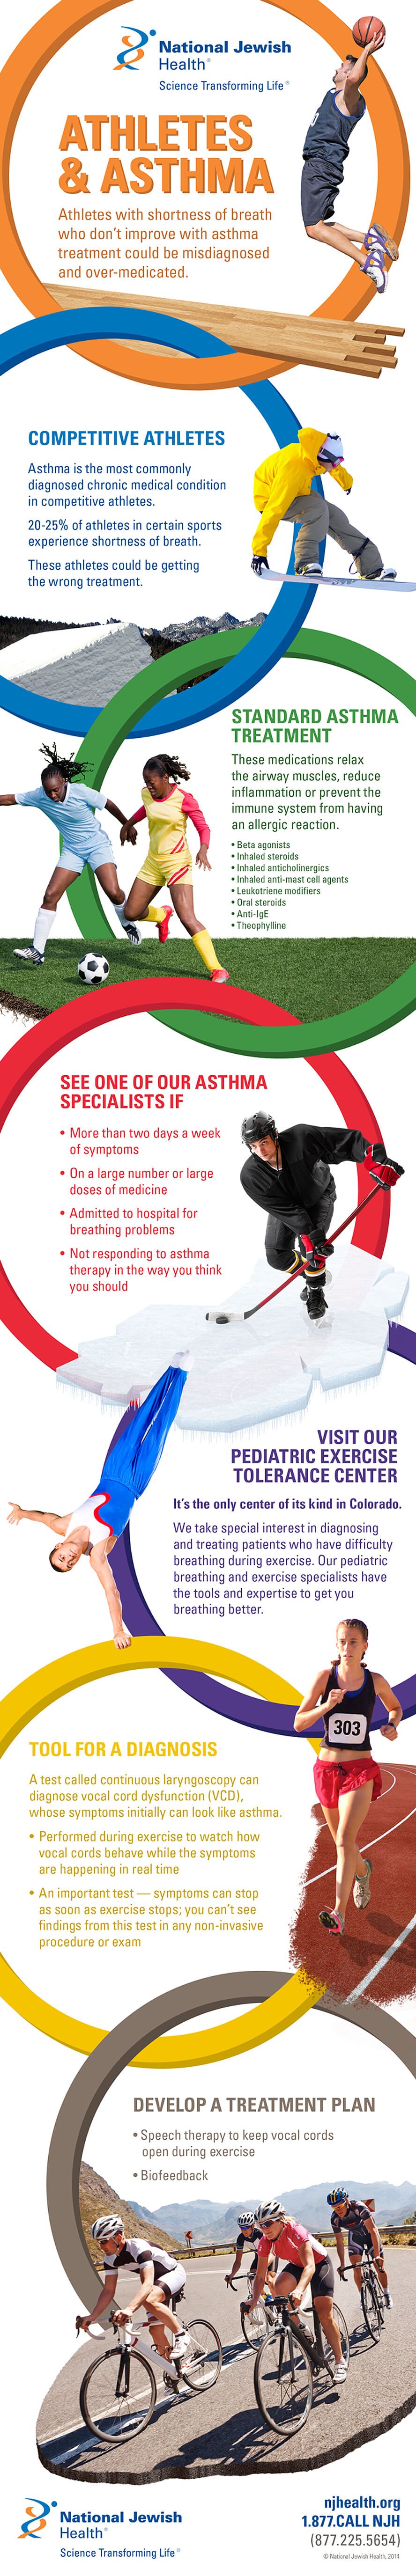 Athletes and Asthma Infographic